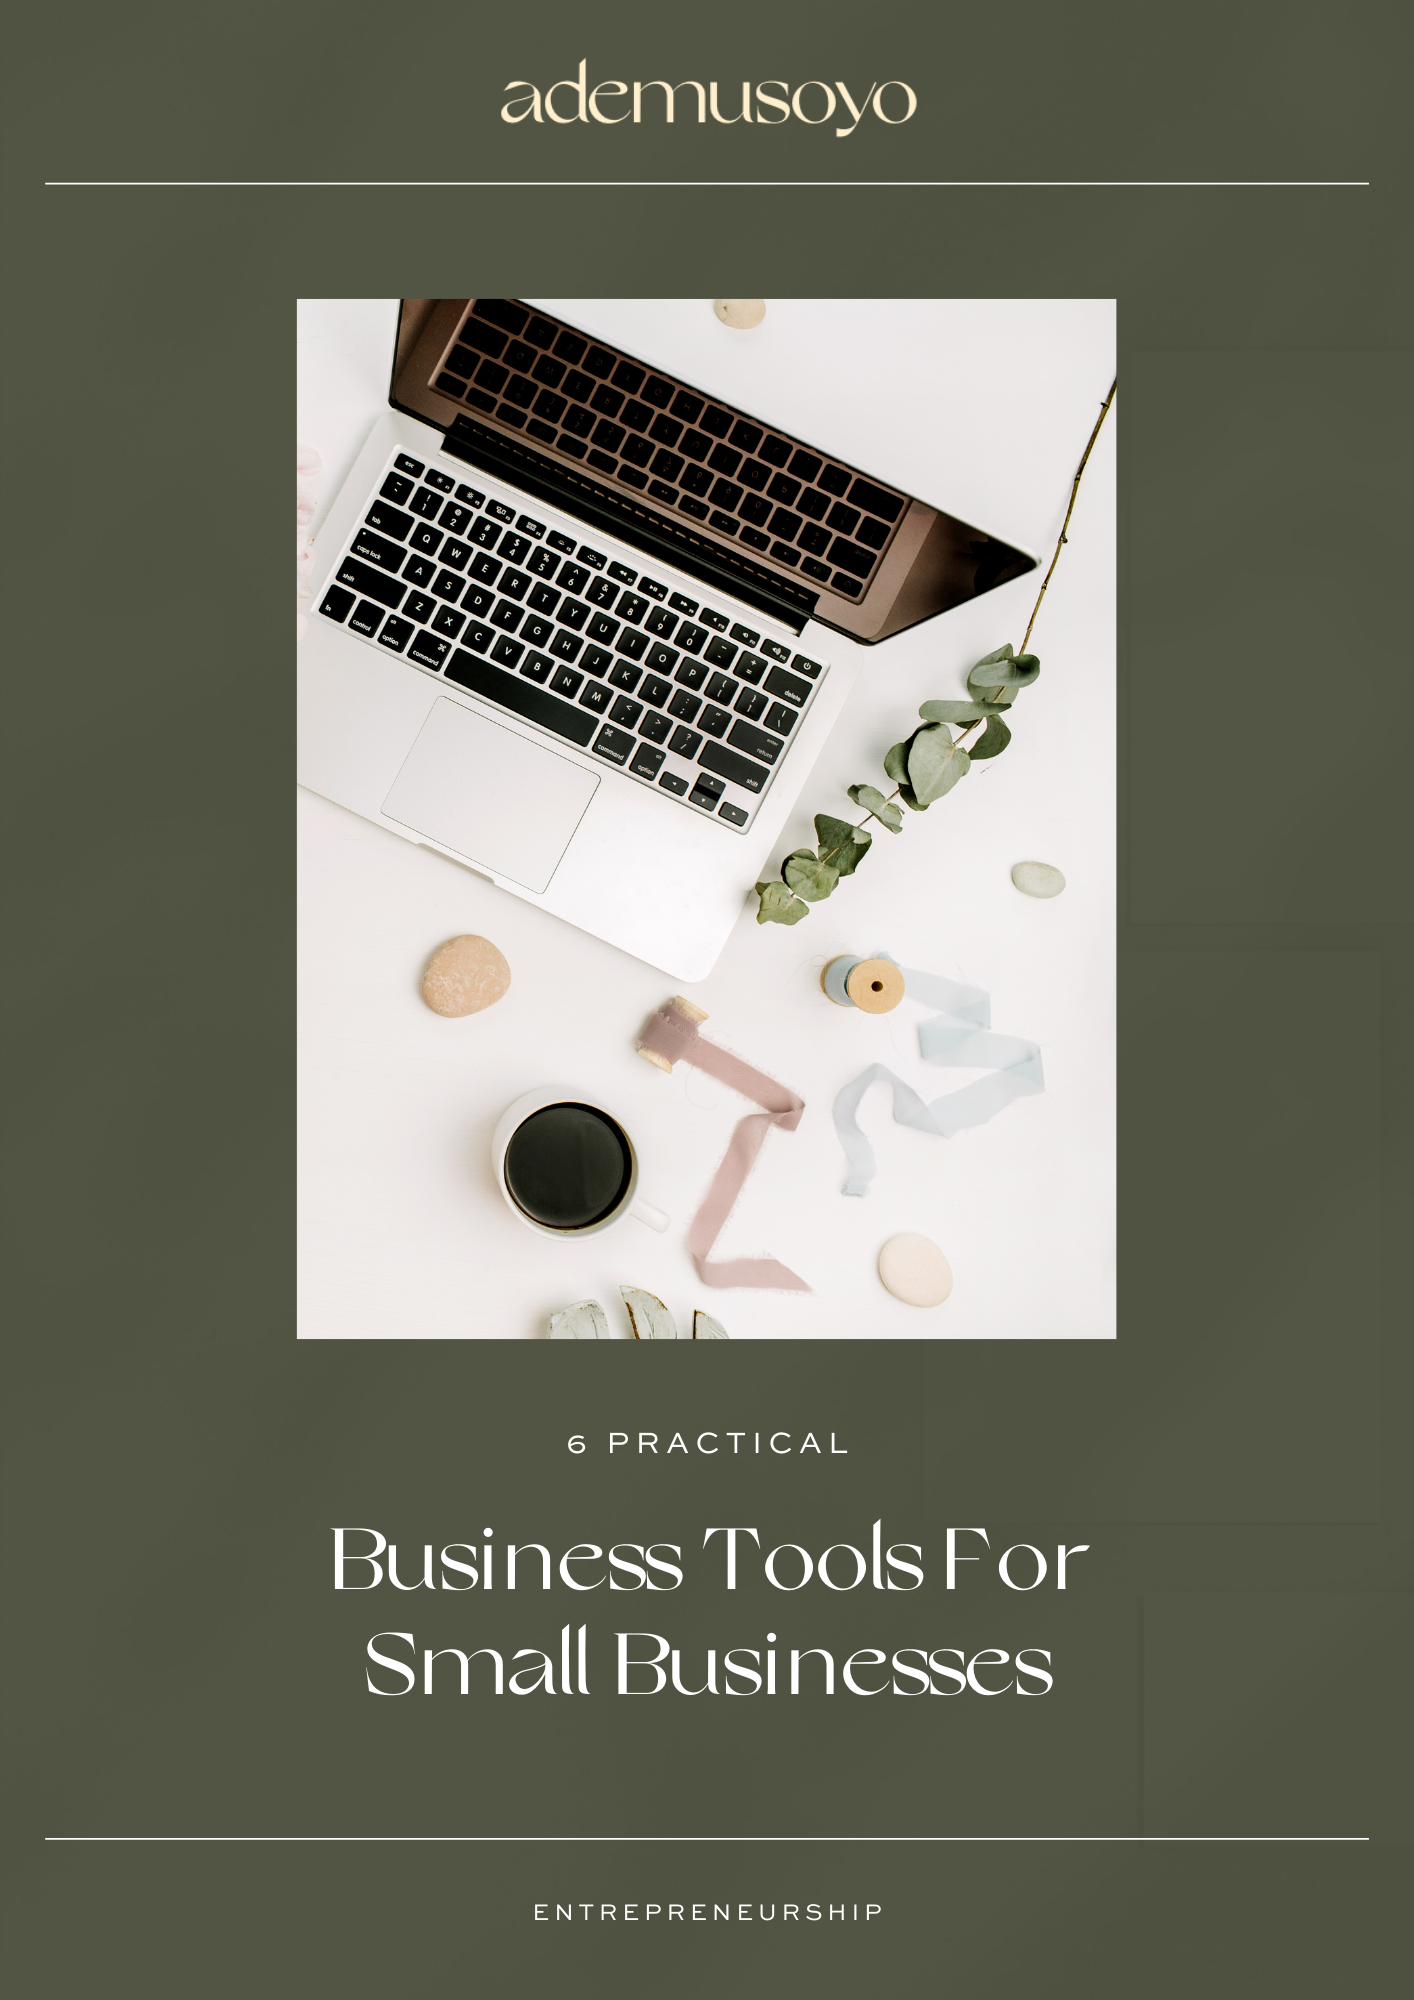 6 Practical Business Tools For Small Businesses